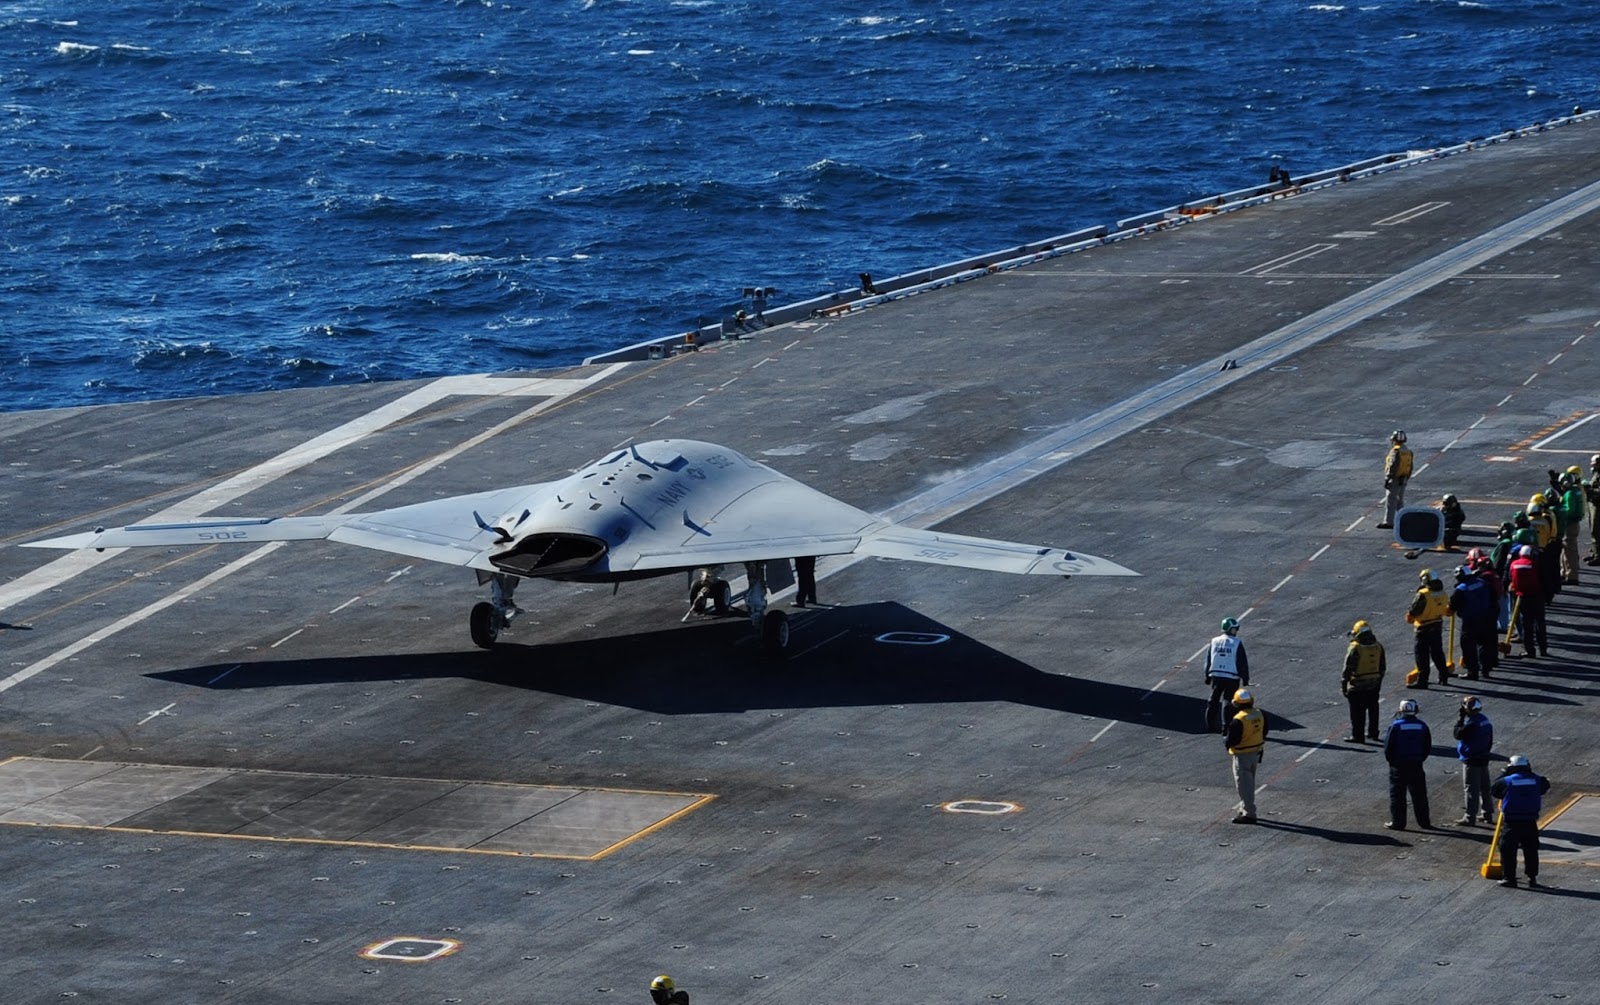 X-47B Unmanned Combat Air System Demonstrator (UCAS-D) by Kris Lindstrom